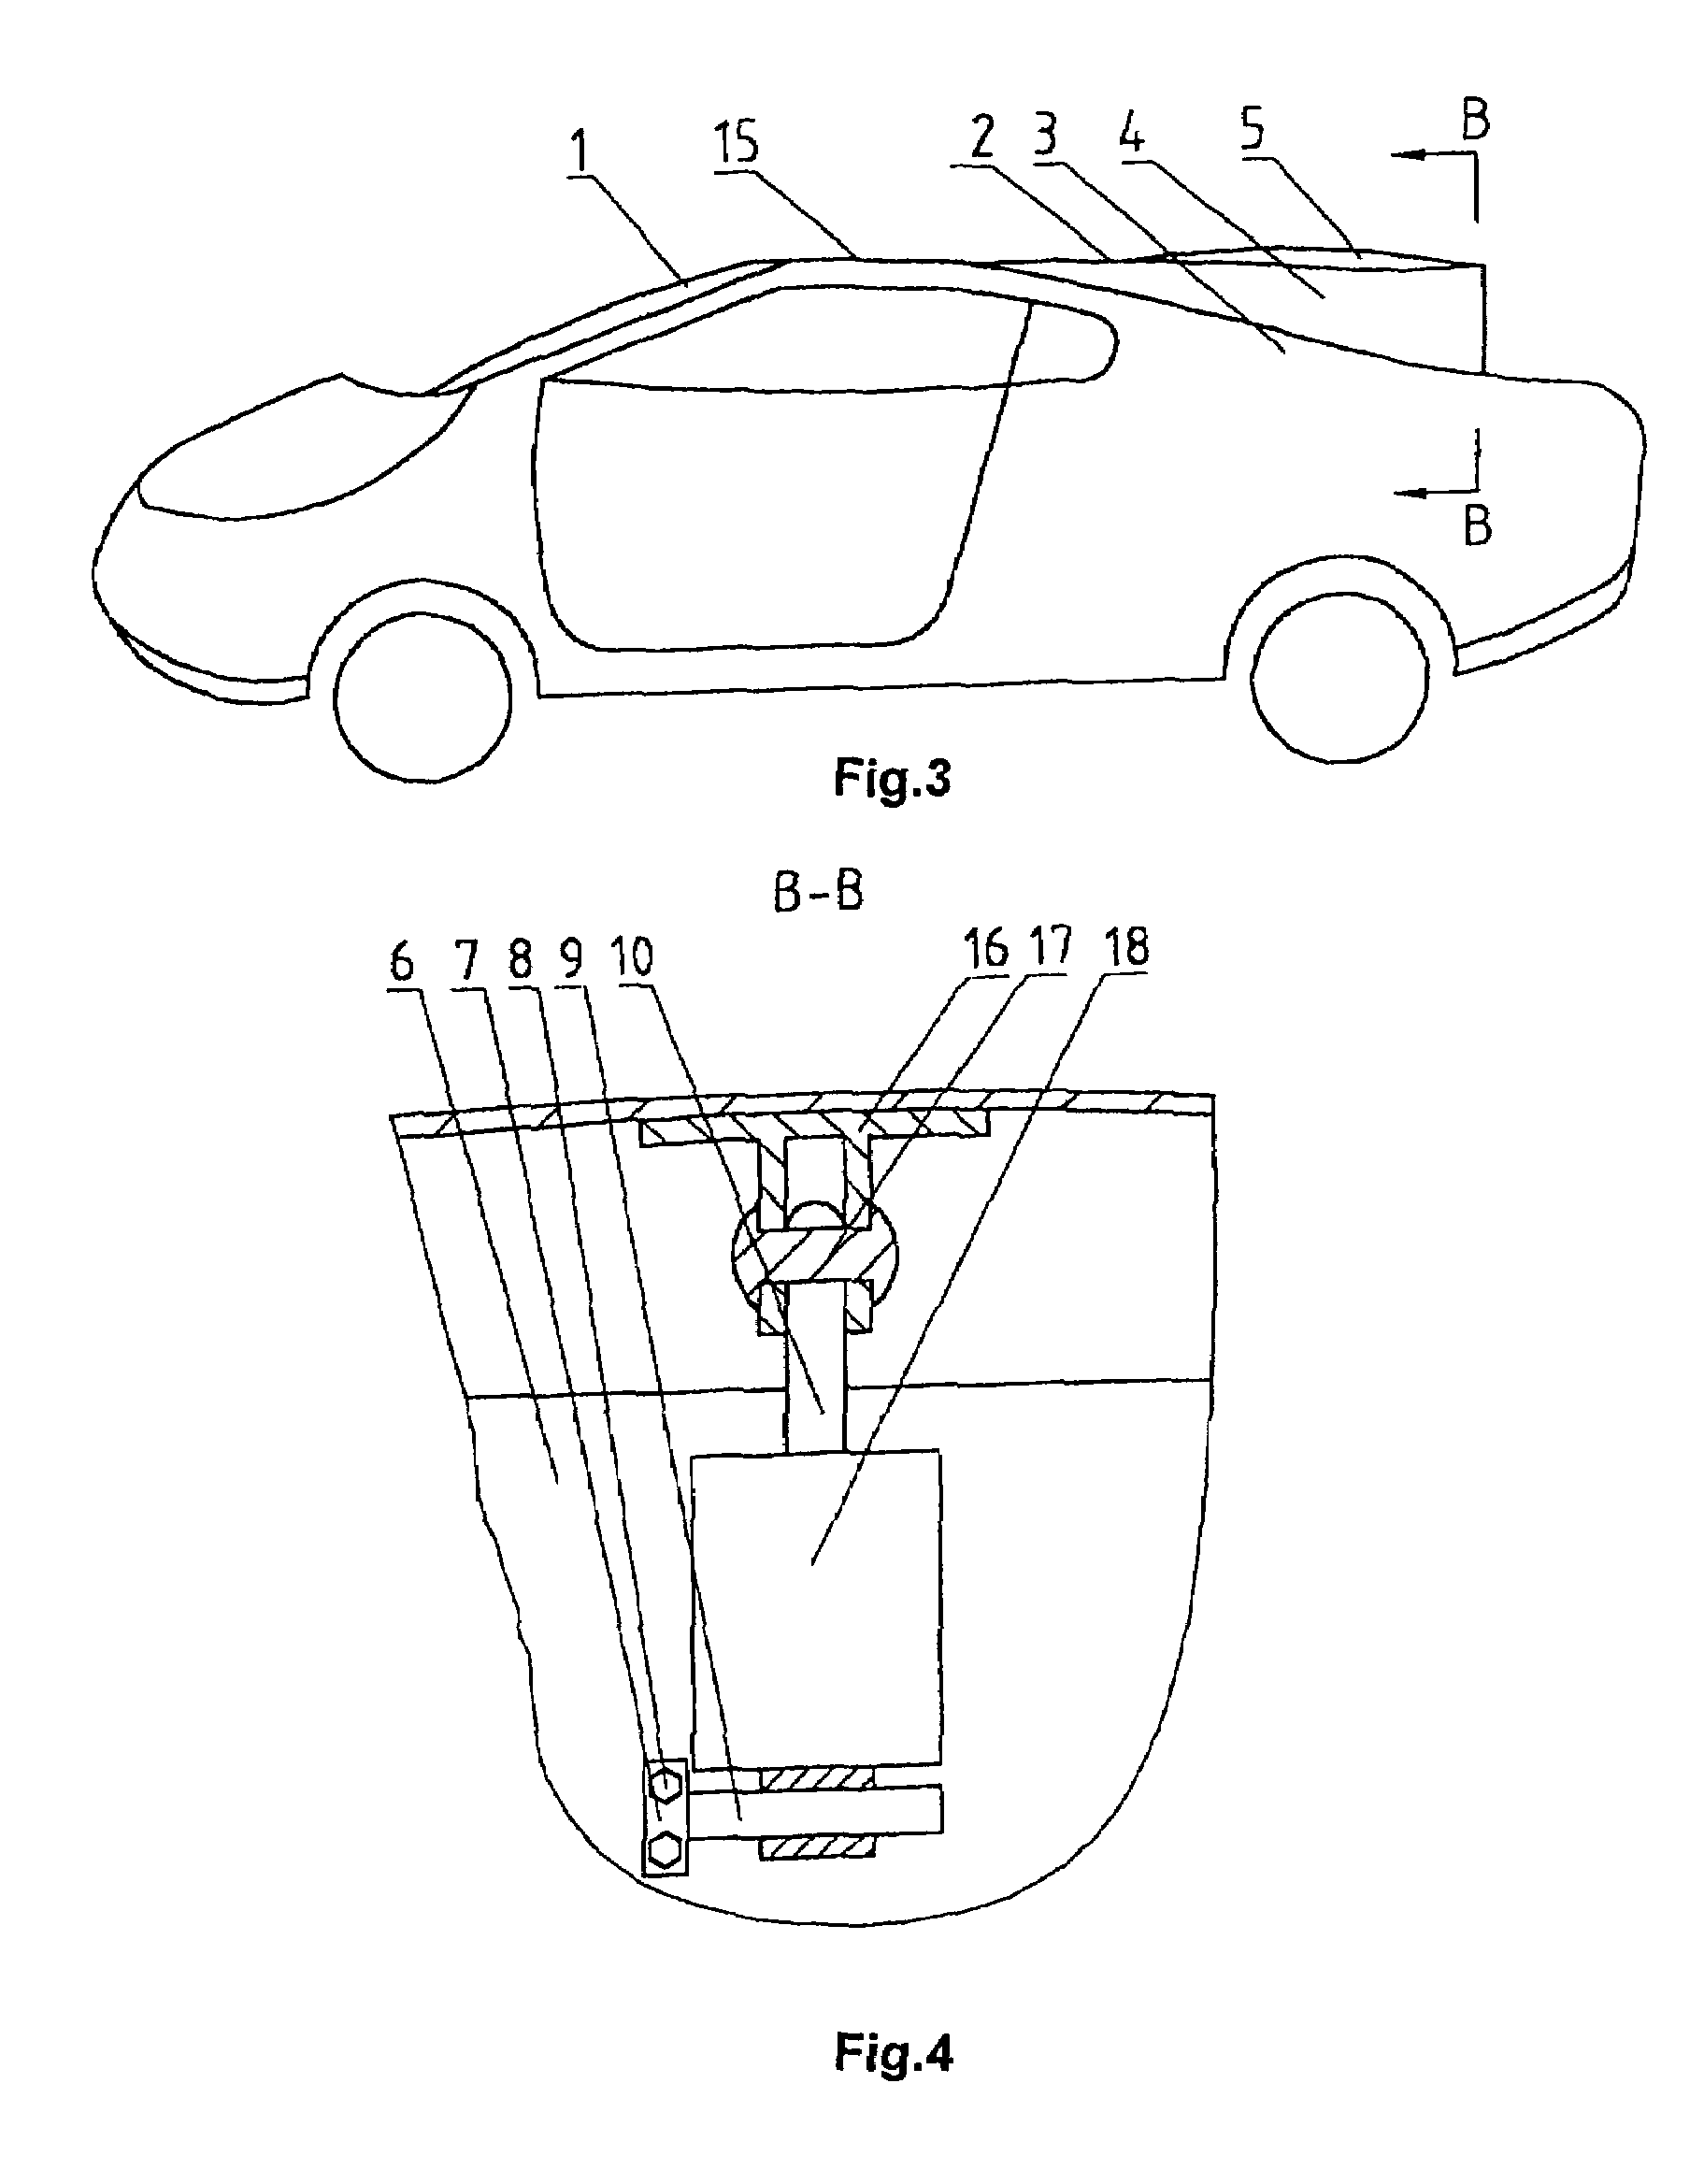 Roof cover plate for the cabin of a car